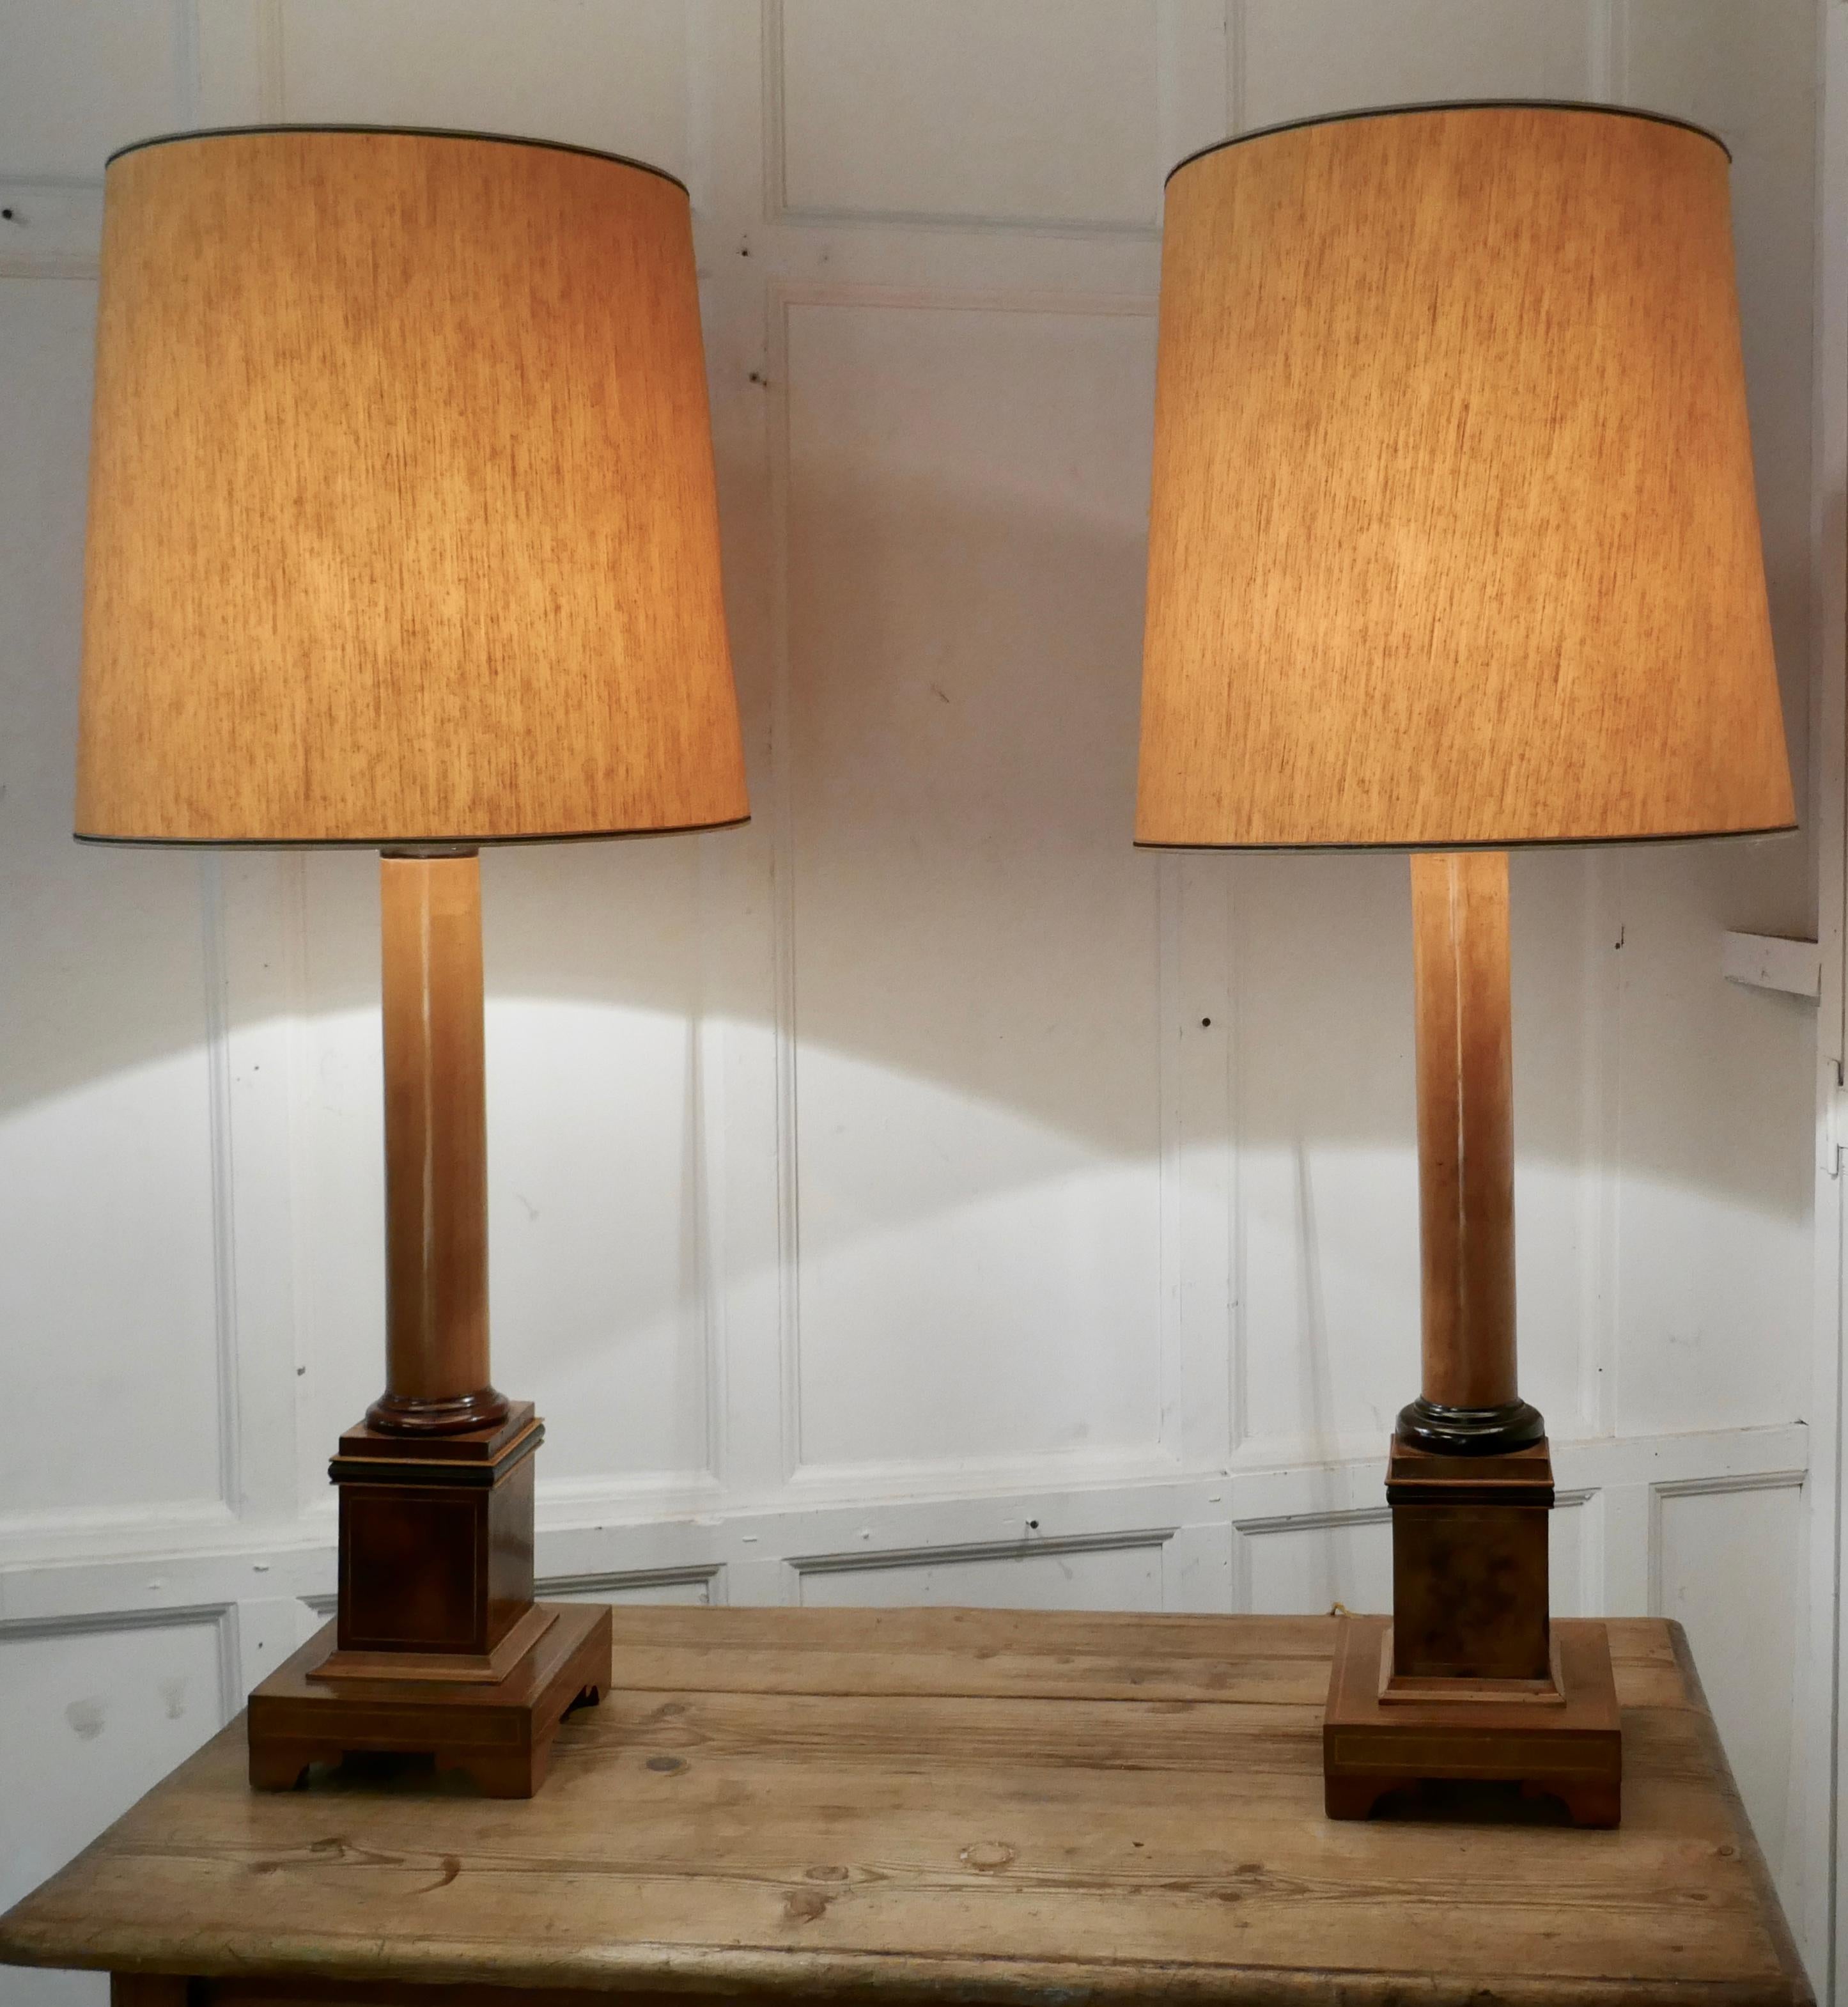 Early 20th Century Pair of Tall Art Deco Maple and Walnut Column Table Lamps